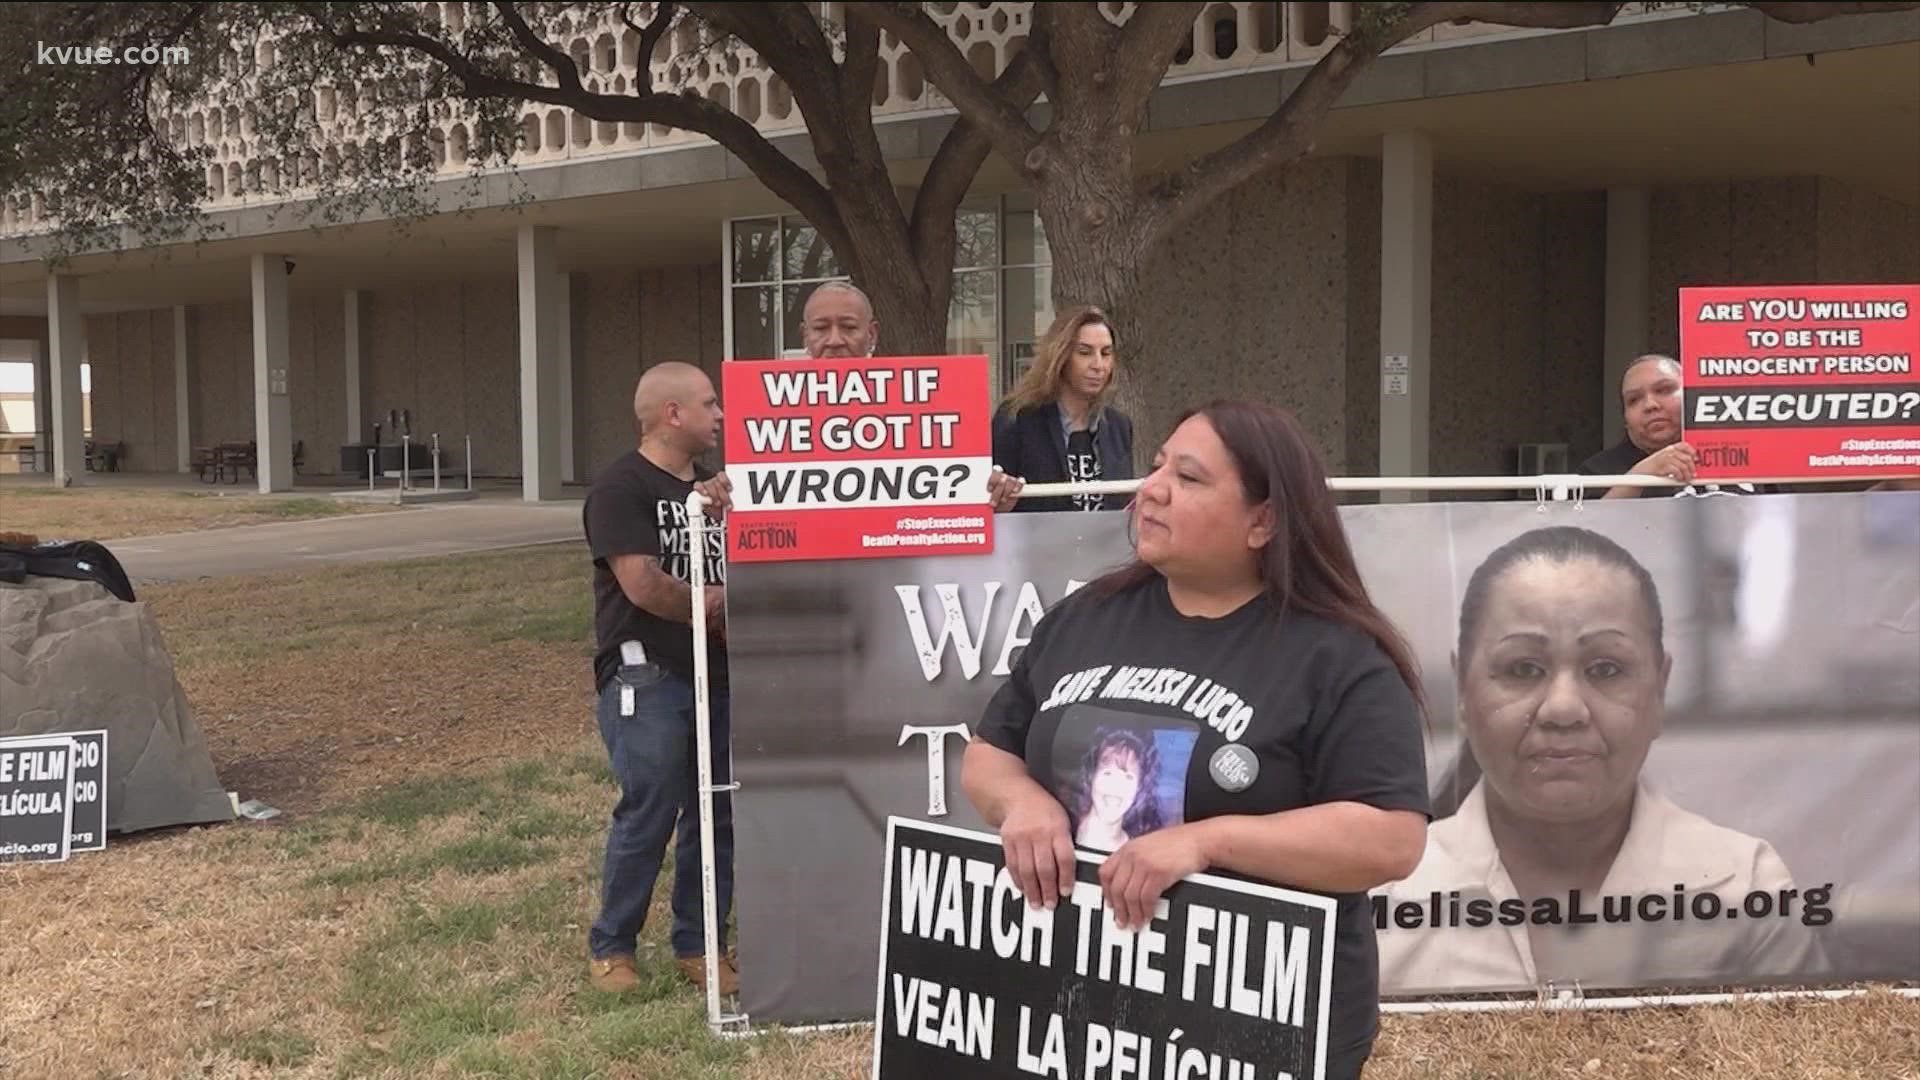 Melissa Lucio is scheduled to be executed in April. A group of petitioners came to Austin on Sunday to raise awareness about Lucio's case.